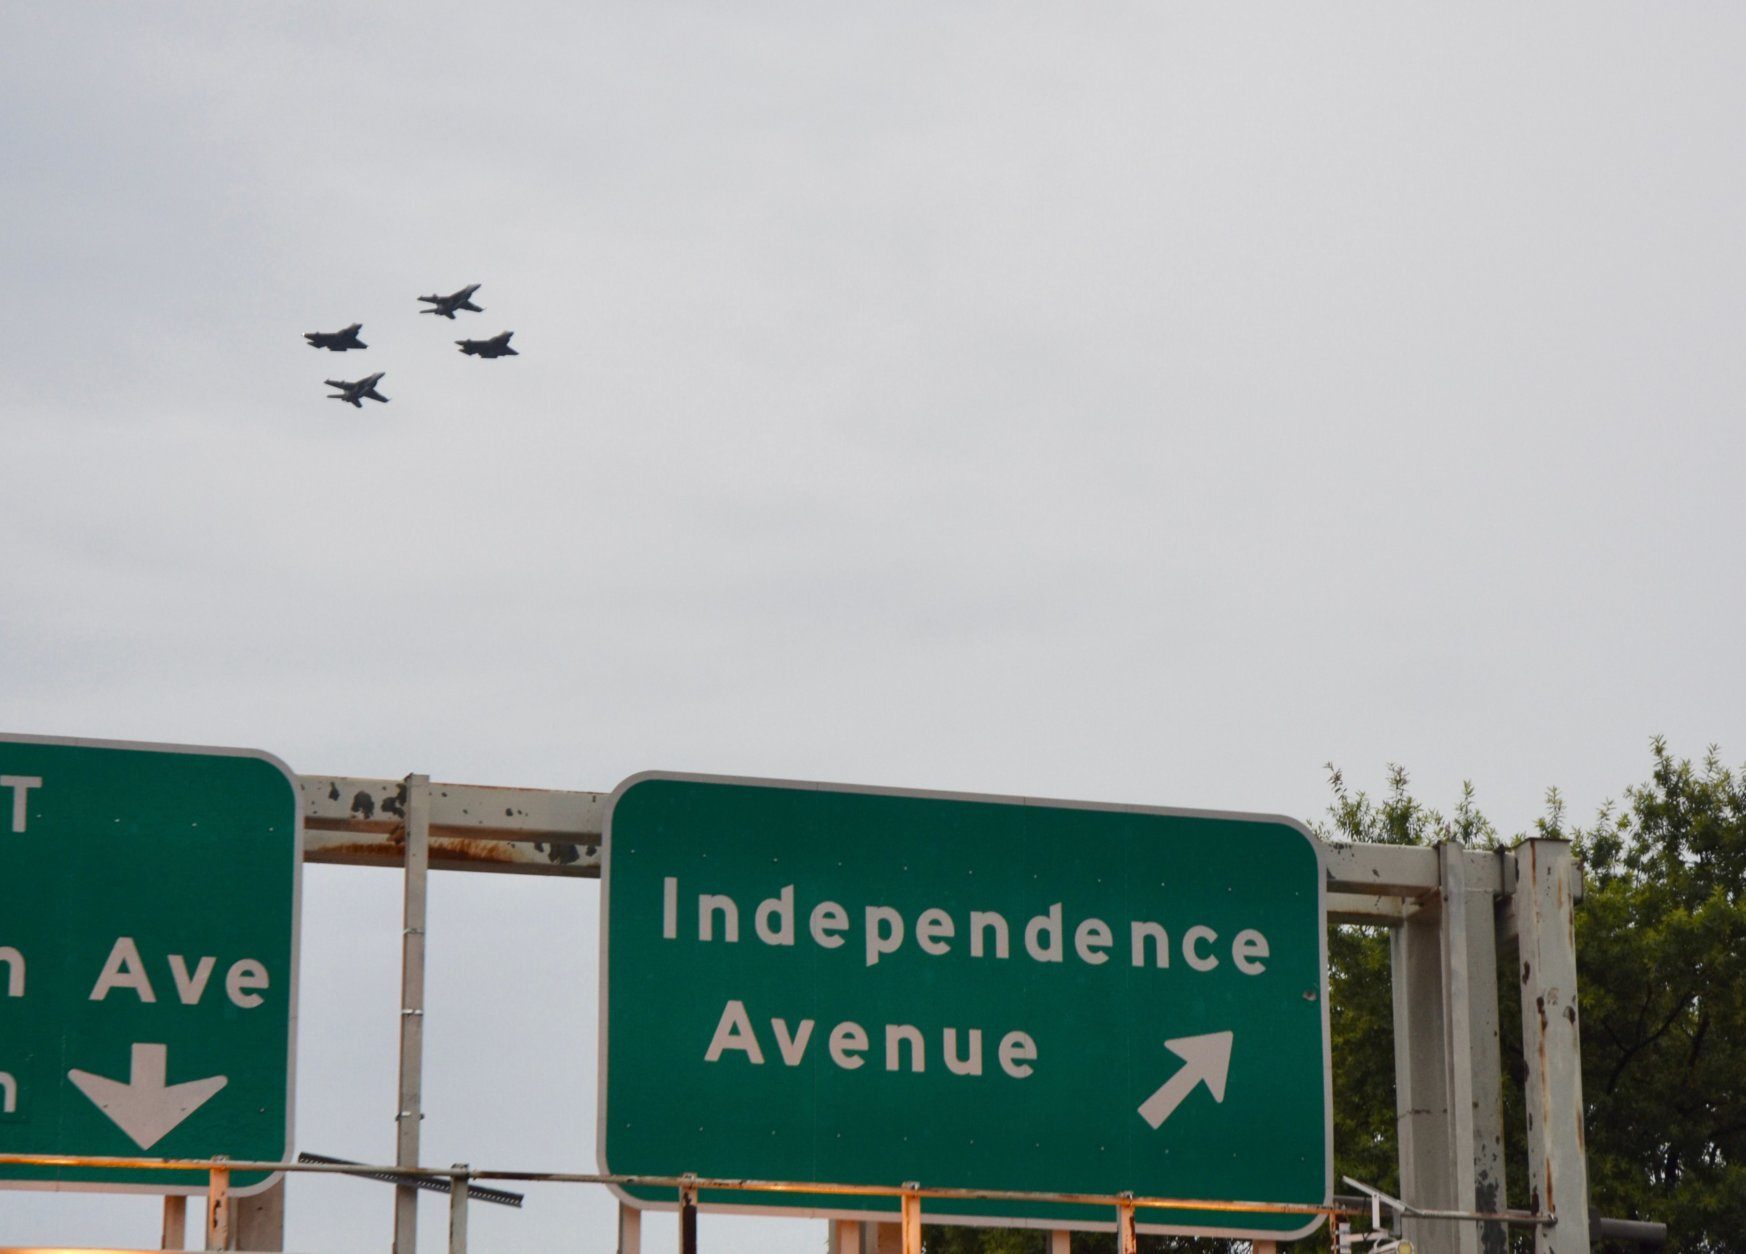 Military planes fly over Independence Avenue in D.C. Thursday evening. (WTOP/Dave Dildine)